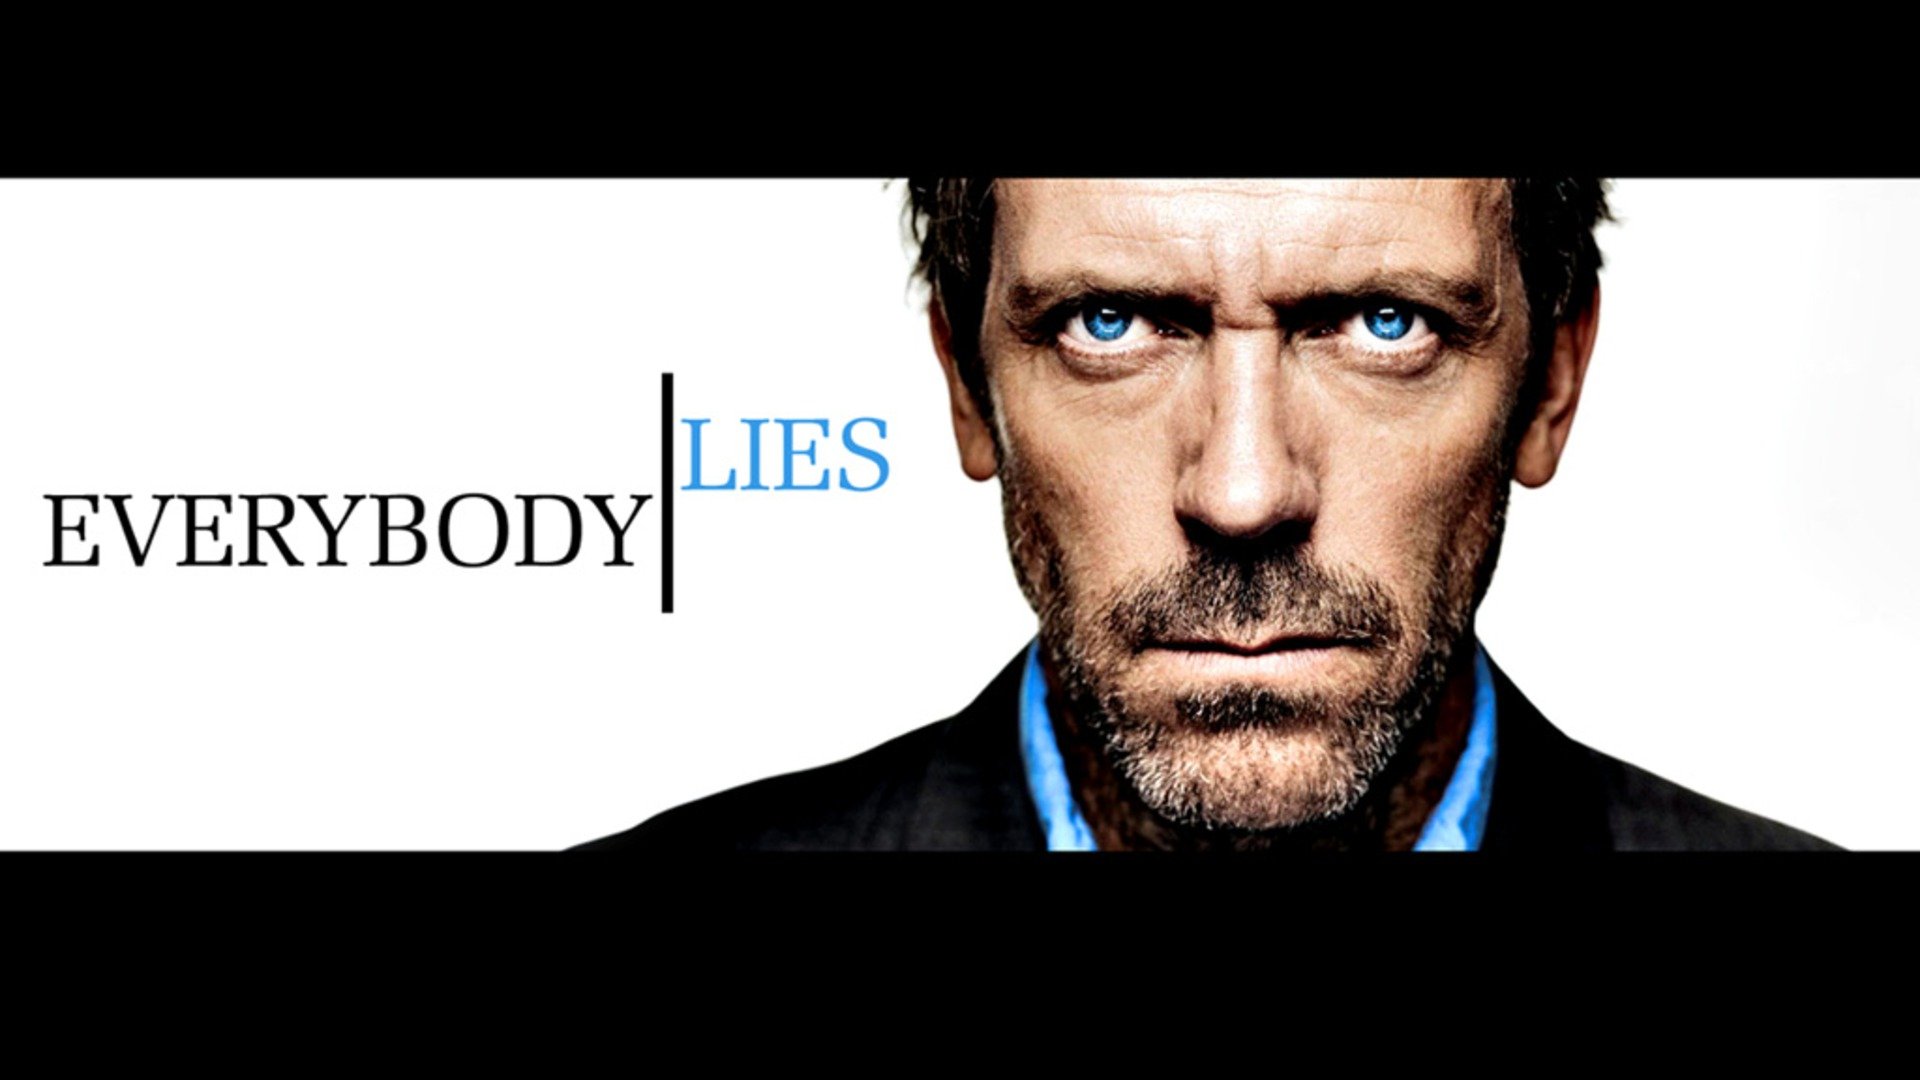 hugh, Laurie, Everybody, Lies, Gregory, House, House, M, Wallpaper